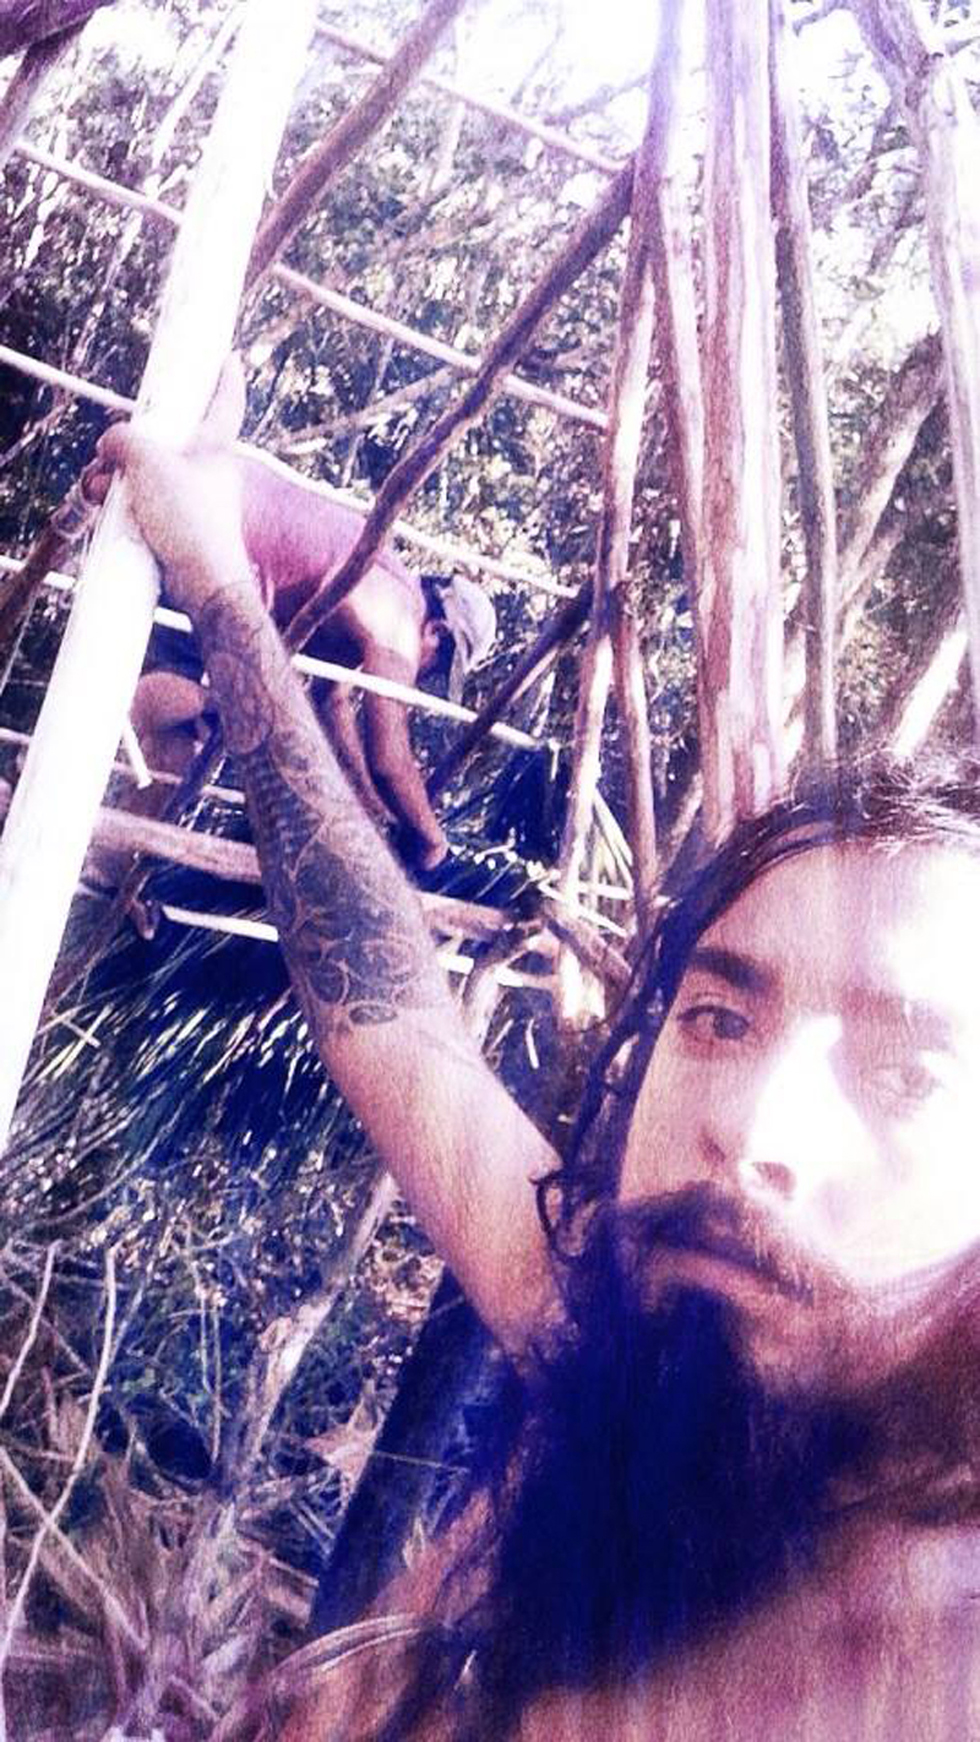 Founder of the Lemurian Embassy, Guillermo Alarcón climbing on location in the jungle